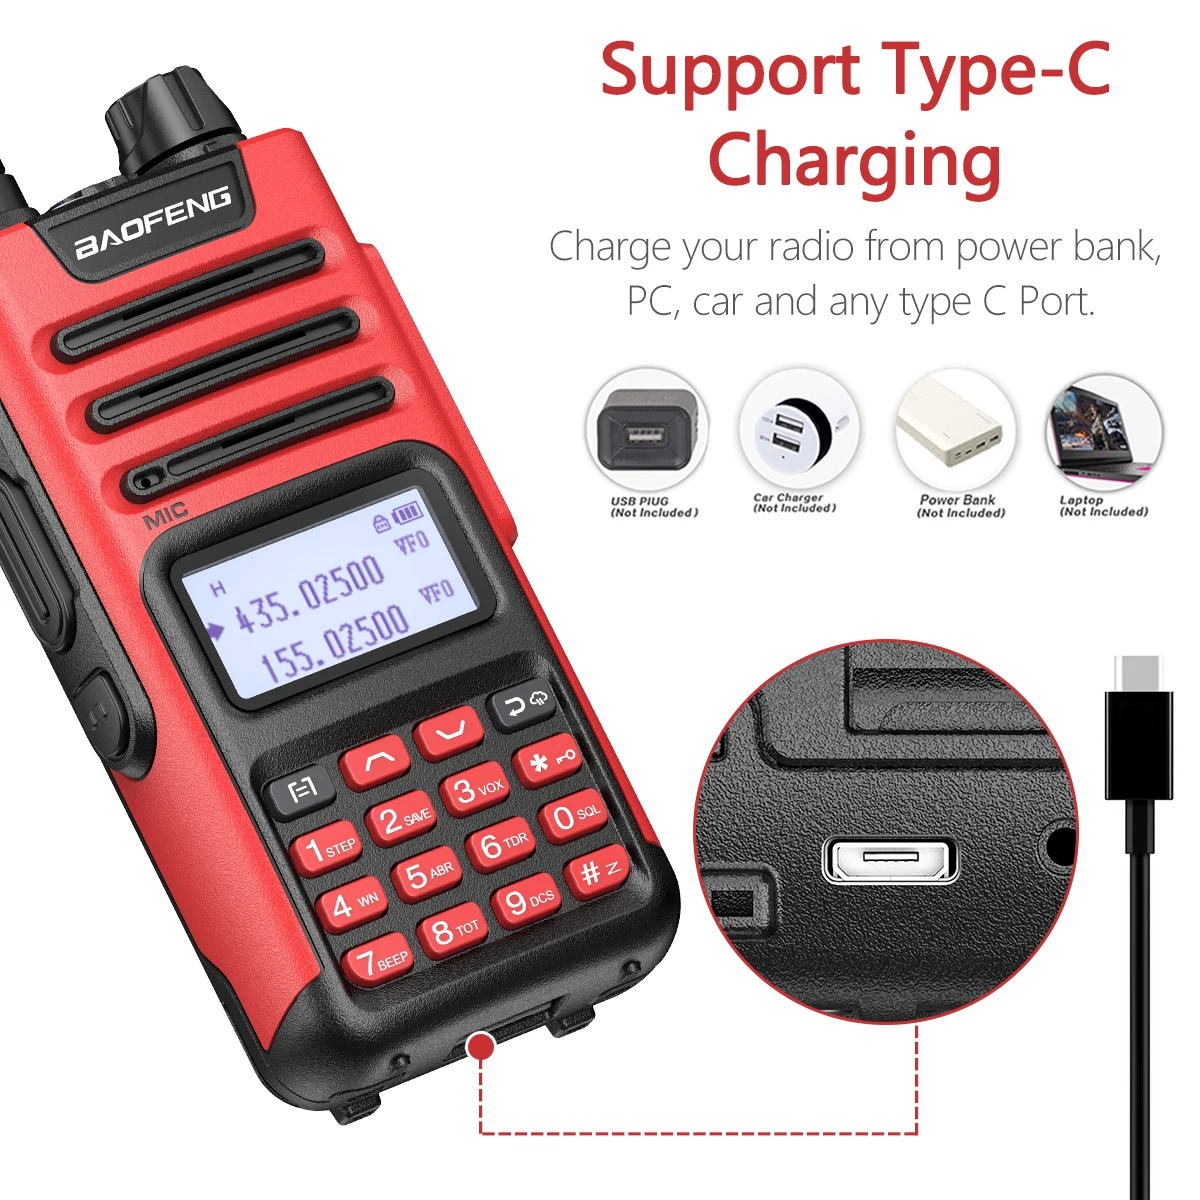 Baofeng UV-13 PRO V2 High Power Waterproof Walkie Talkie VHF UHF  136-174/400-520MHz Transceiver Add USB Charger Two Way Radio AliExpress